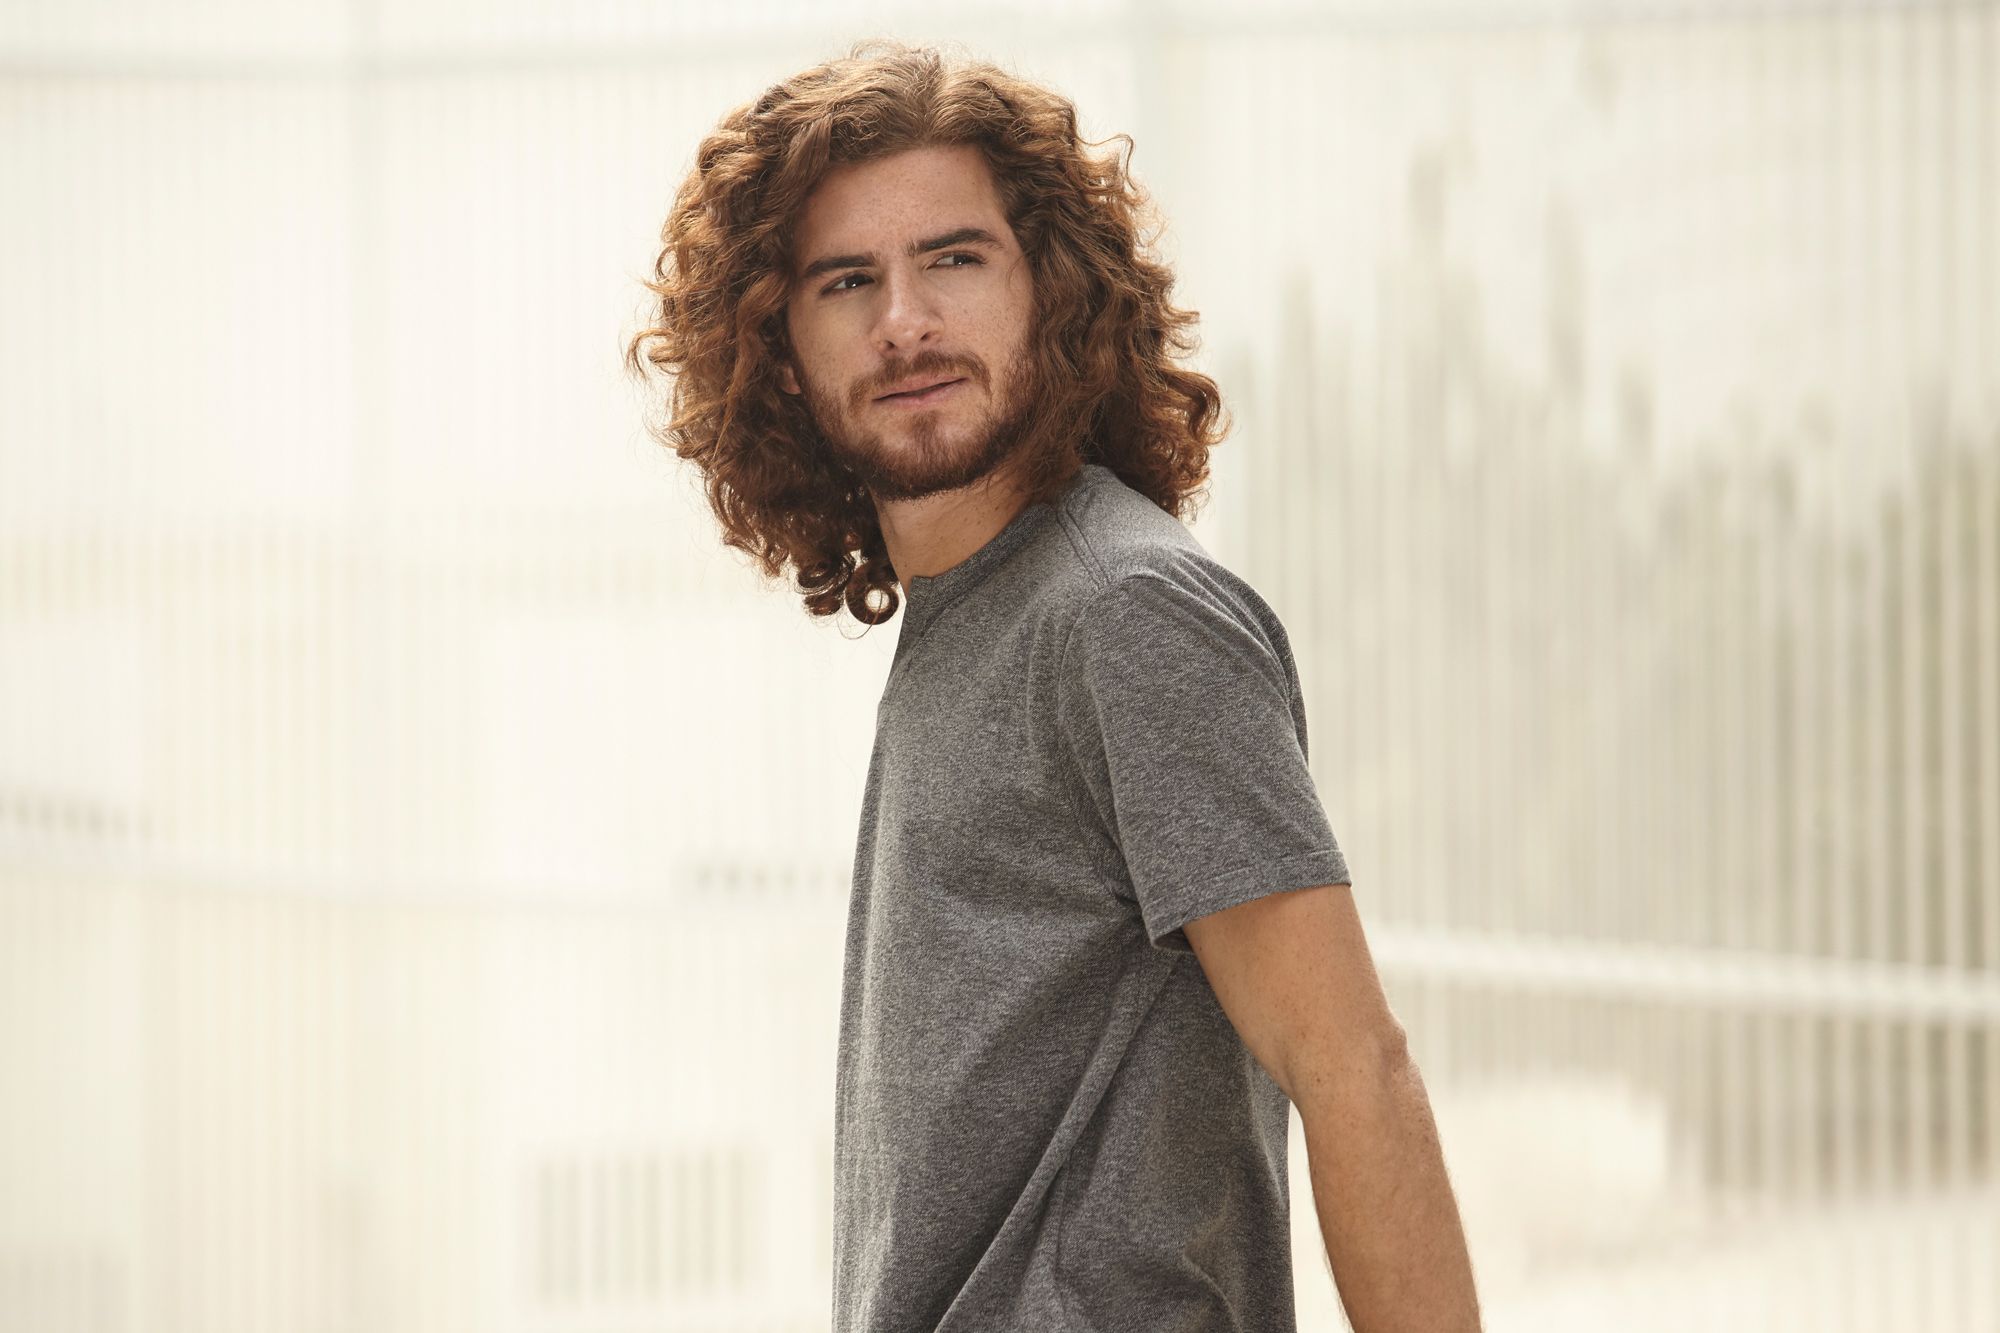 104 of the Best Curly Hairstyles for Men (Haircut Ideas) | Men's curly  hairstyles, Curly hair styles, Curly hair trends